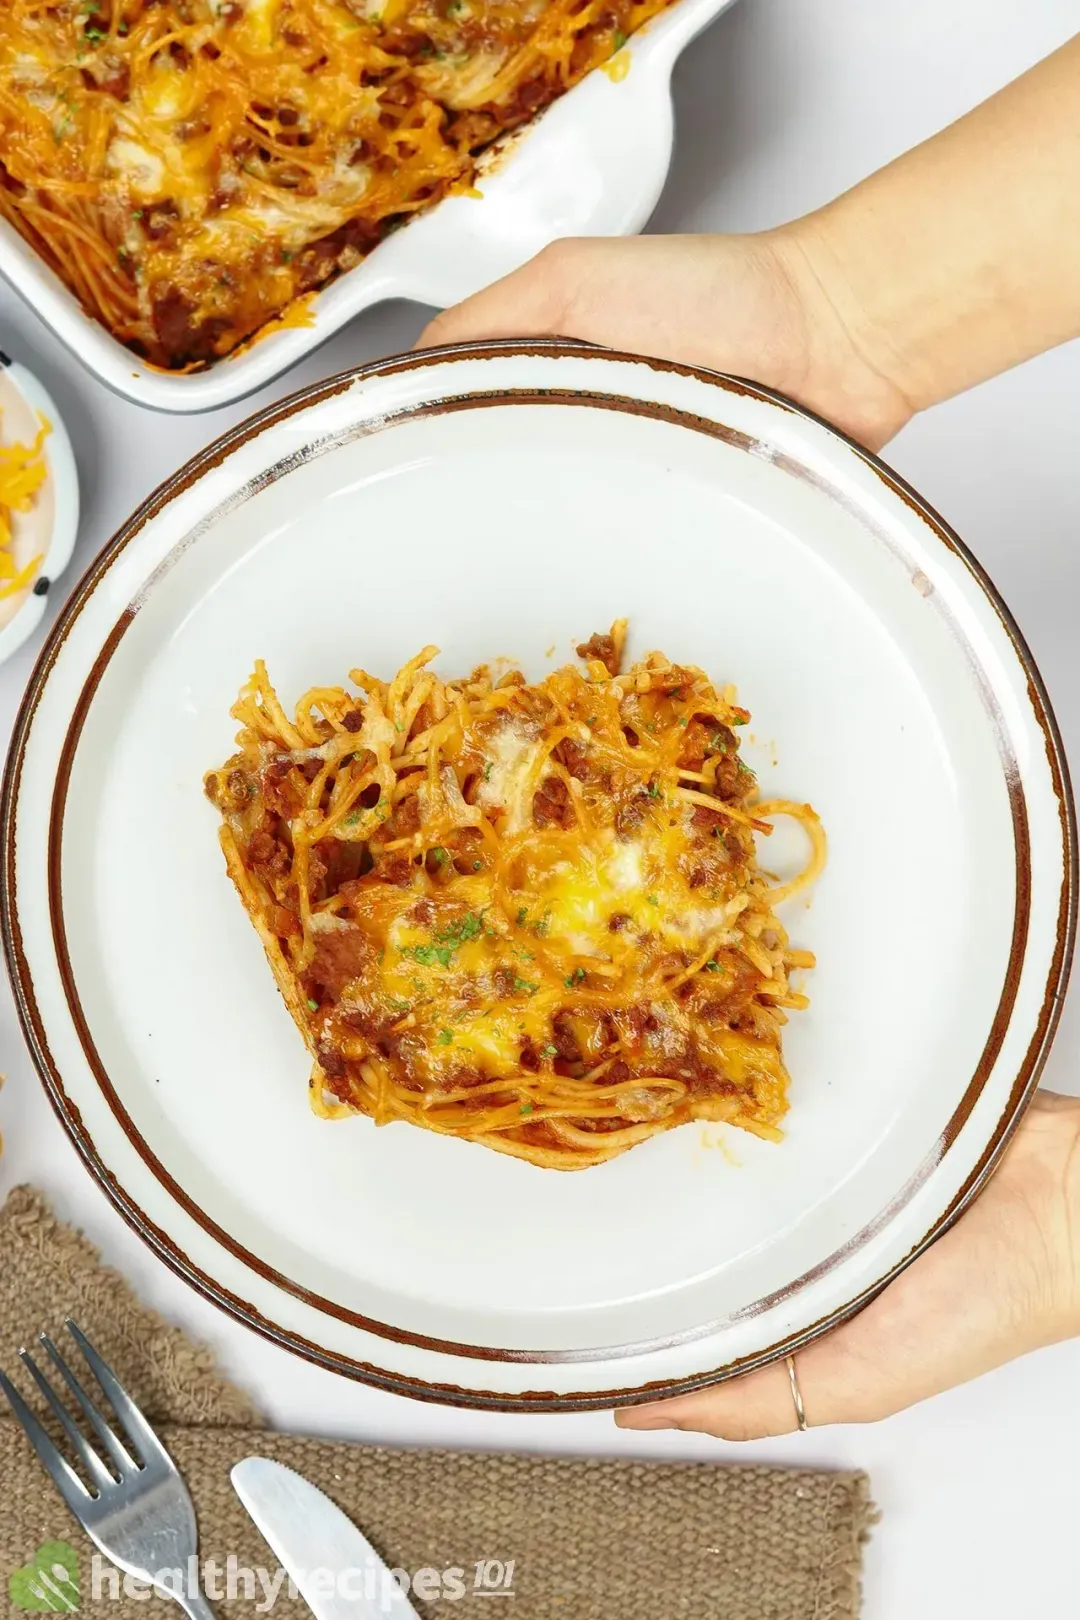 What to Serve With Baked Spaghetti